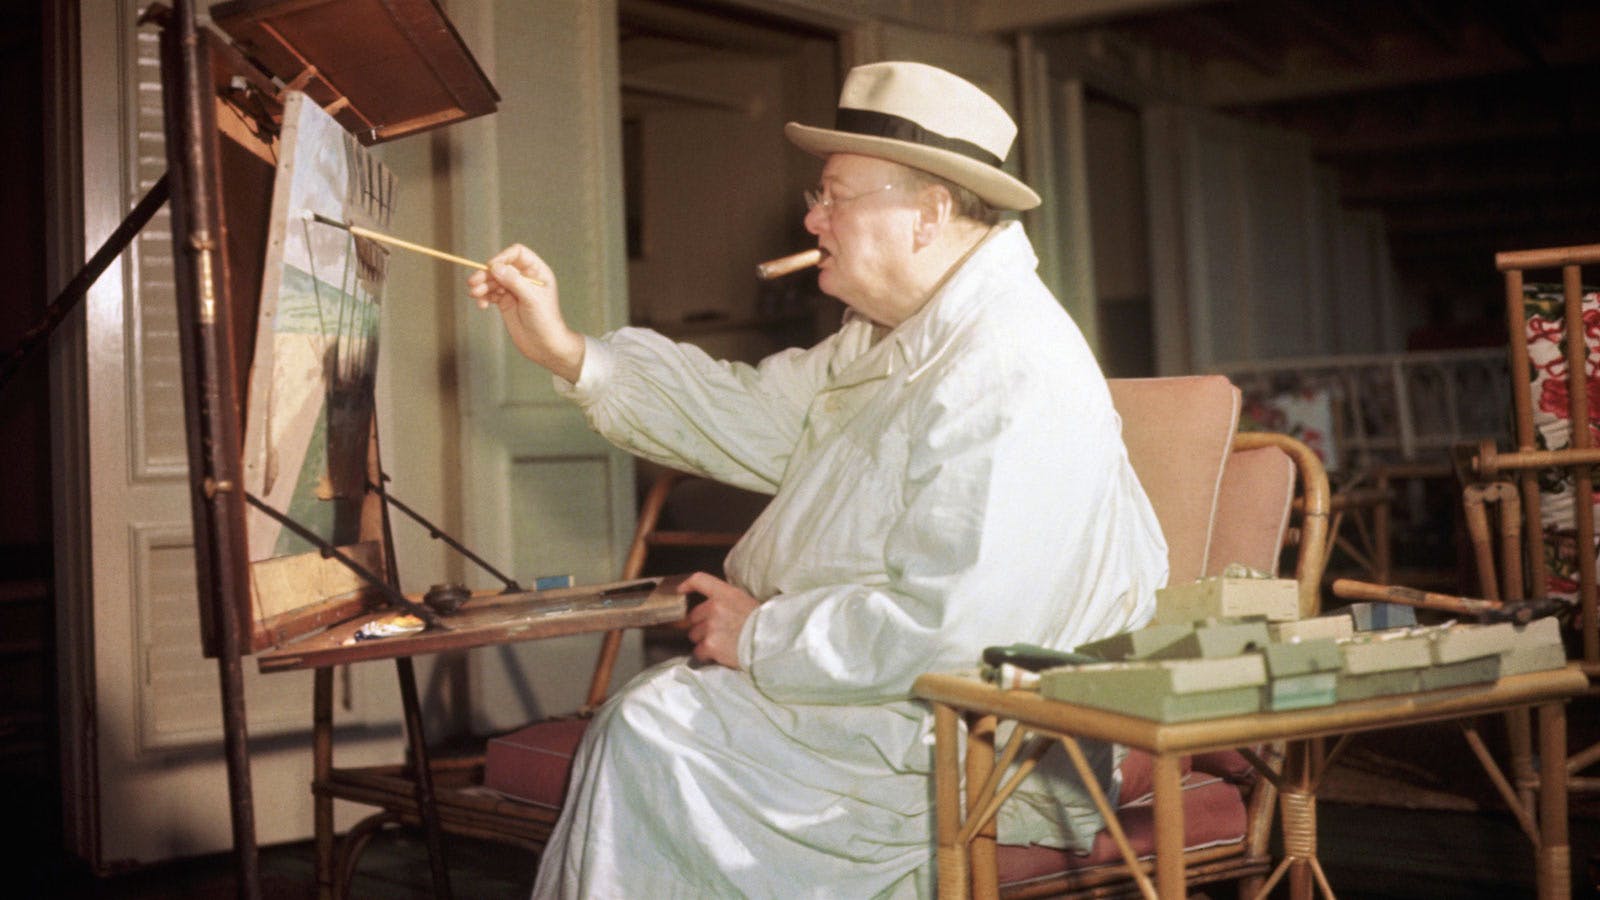 Sir Winston Churchill relaxes while smoking and painting in his art studio.